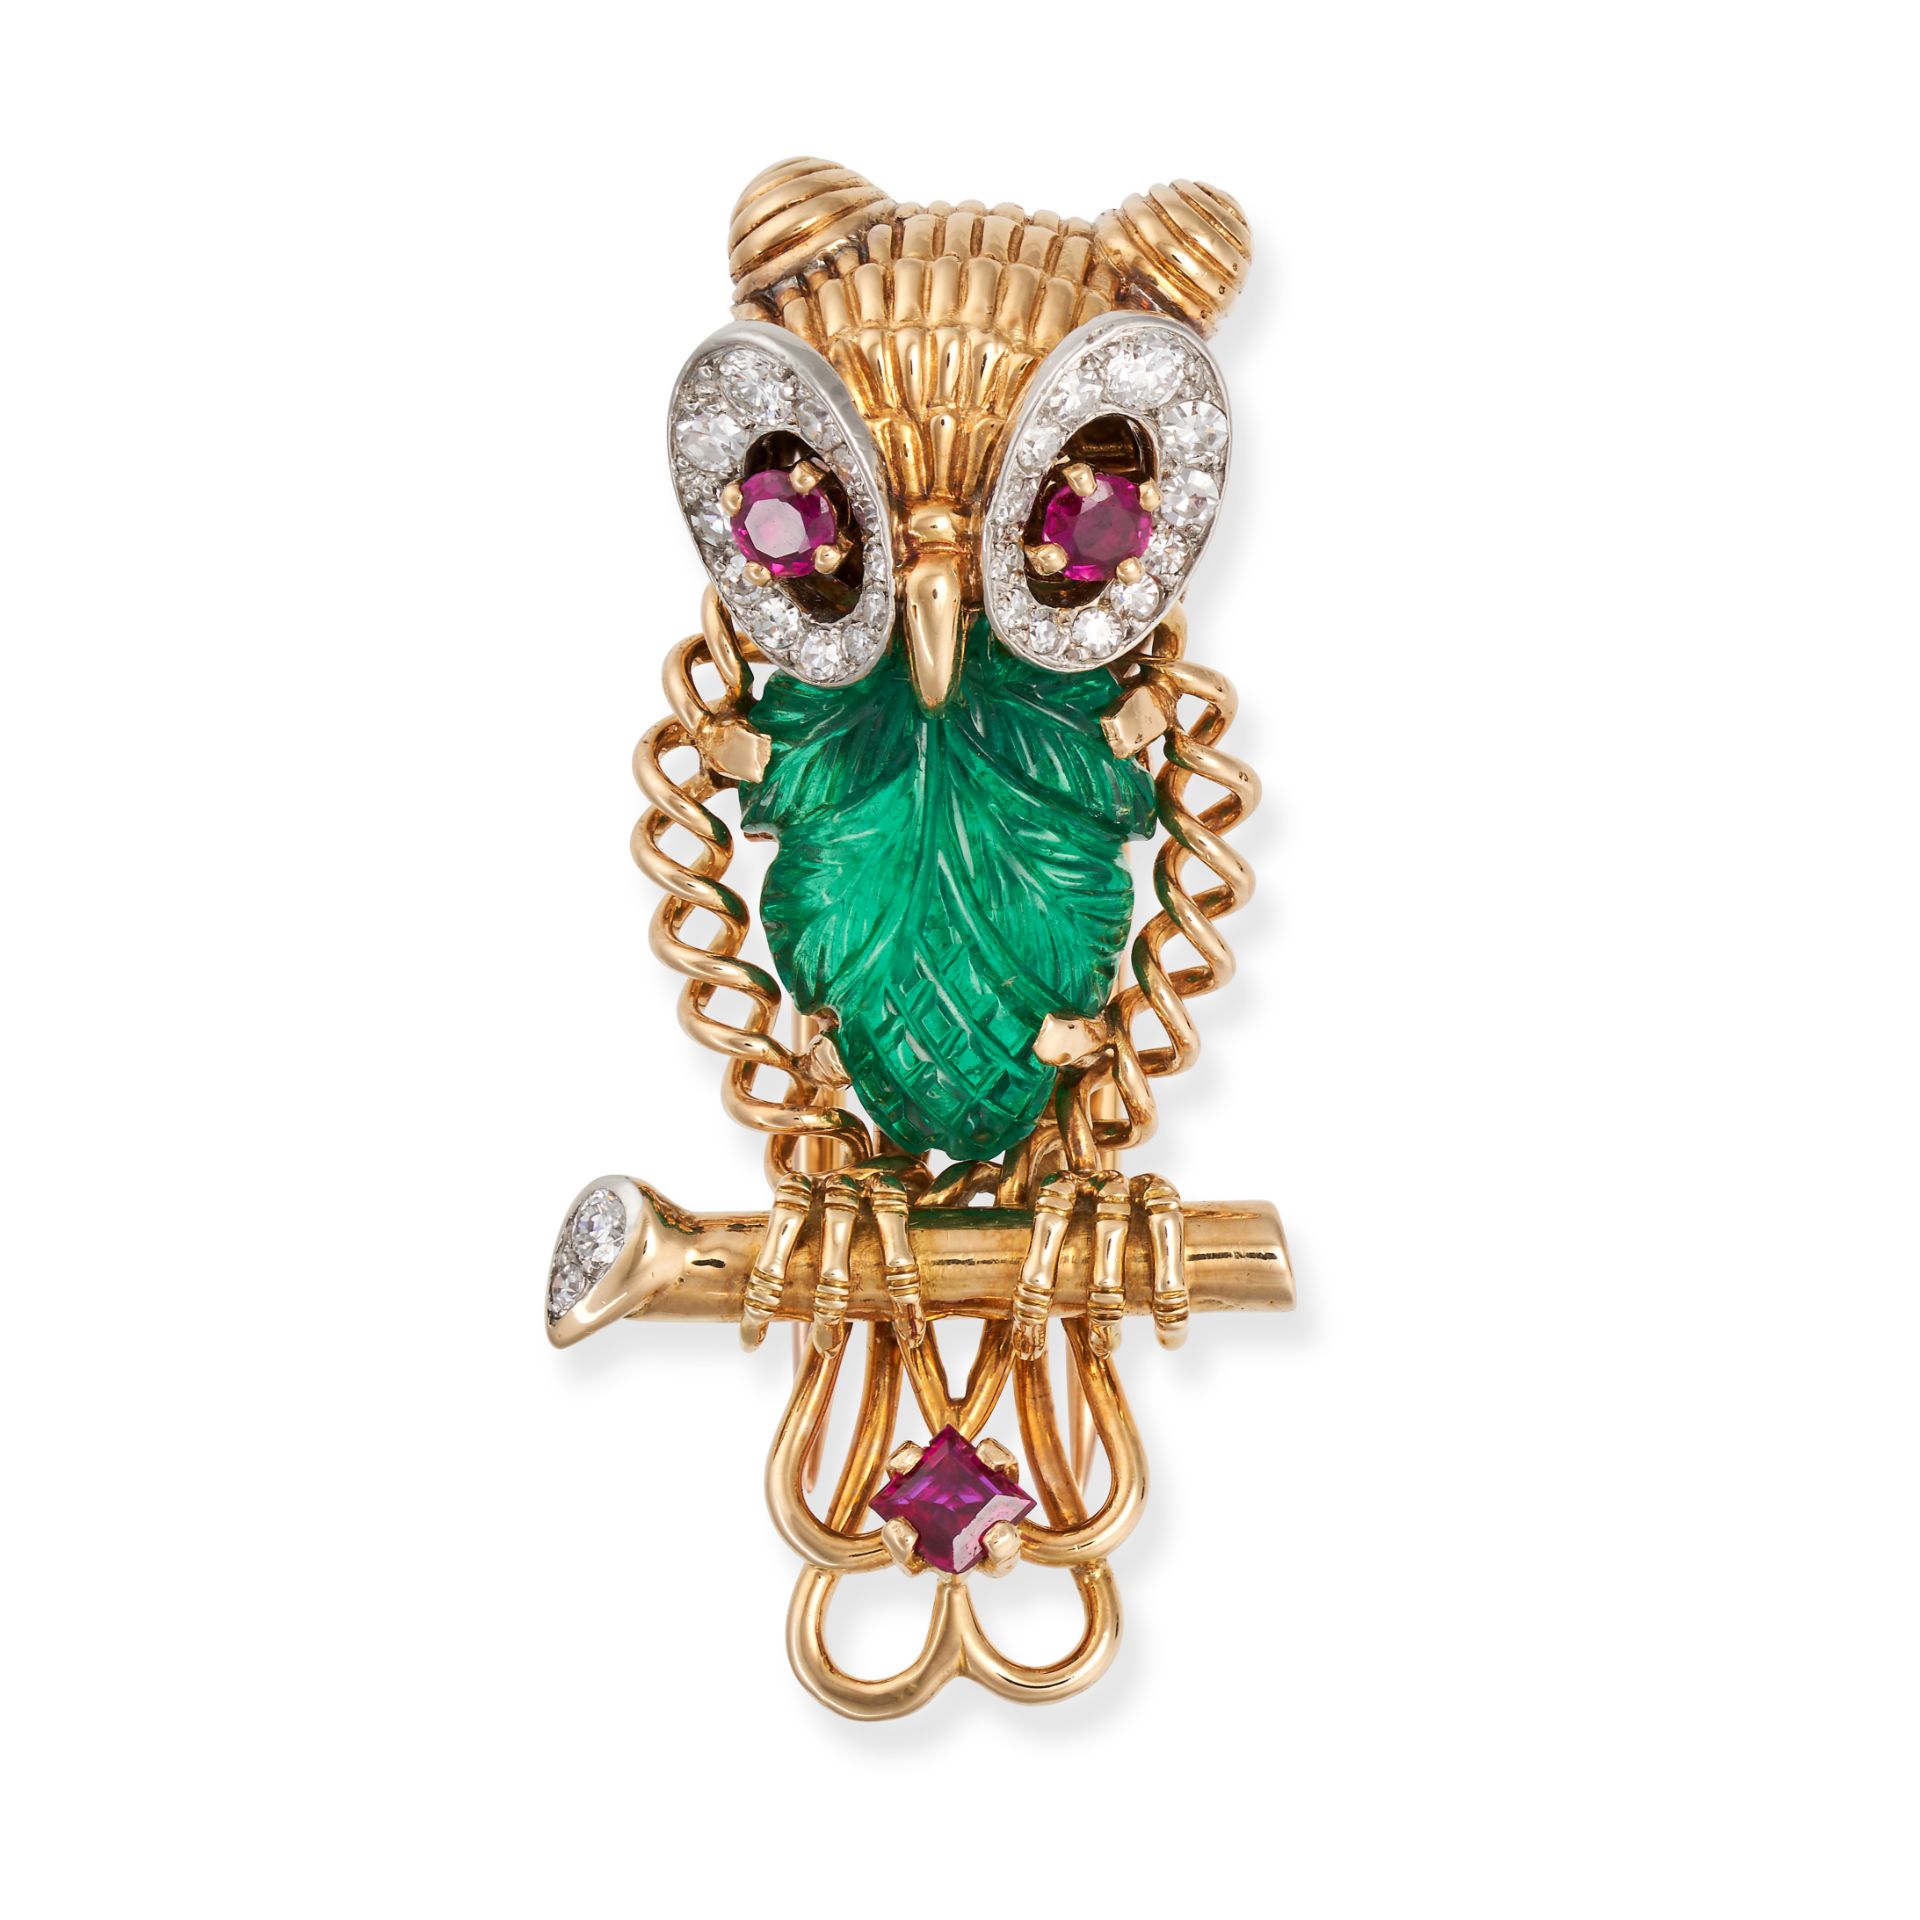 CARTIER, A COLOMBIAN EMERALD, RUBY AND DIAMOND OWL BROOCH, CIRCA 1950 in 18ct yellow gold, design...